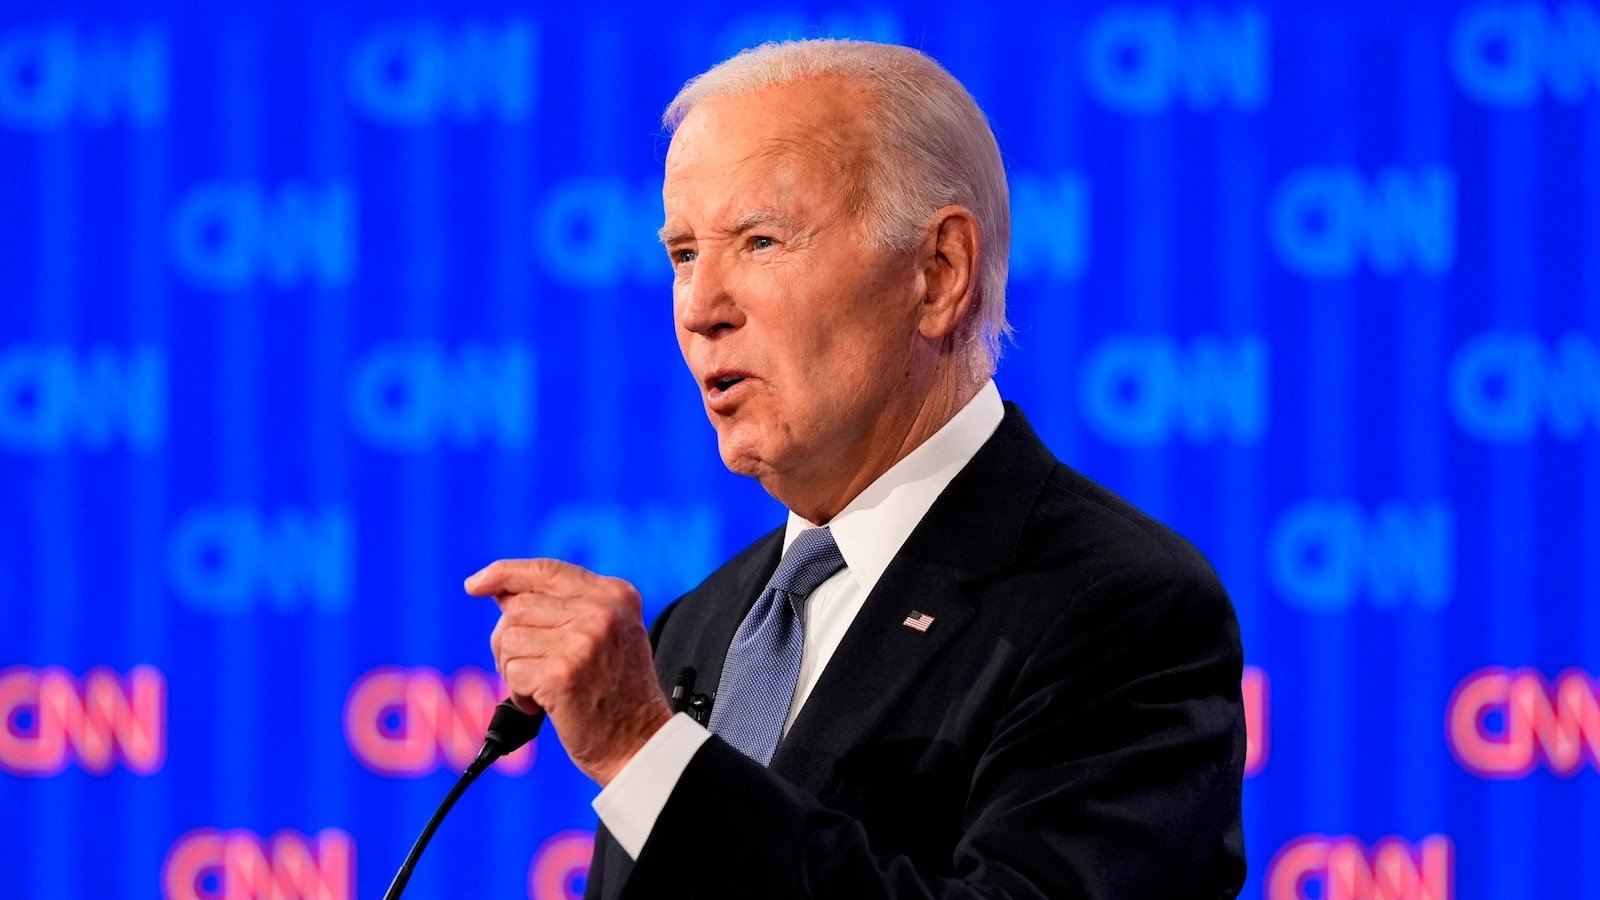 'A direct and candid conversation': Democratic governors speak before Biden meeting